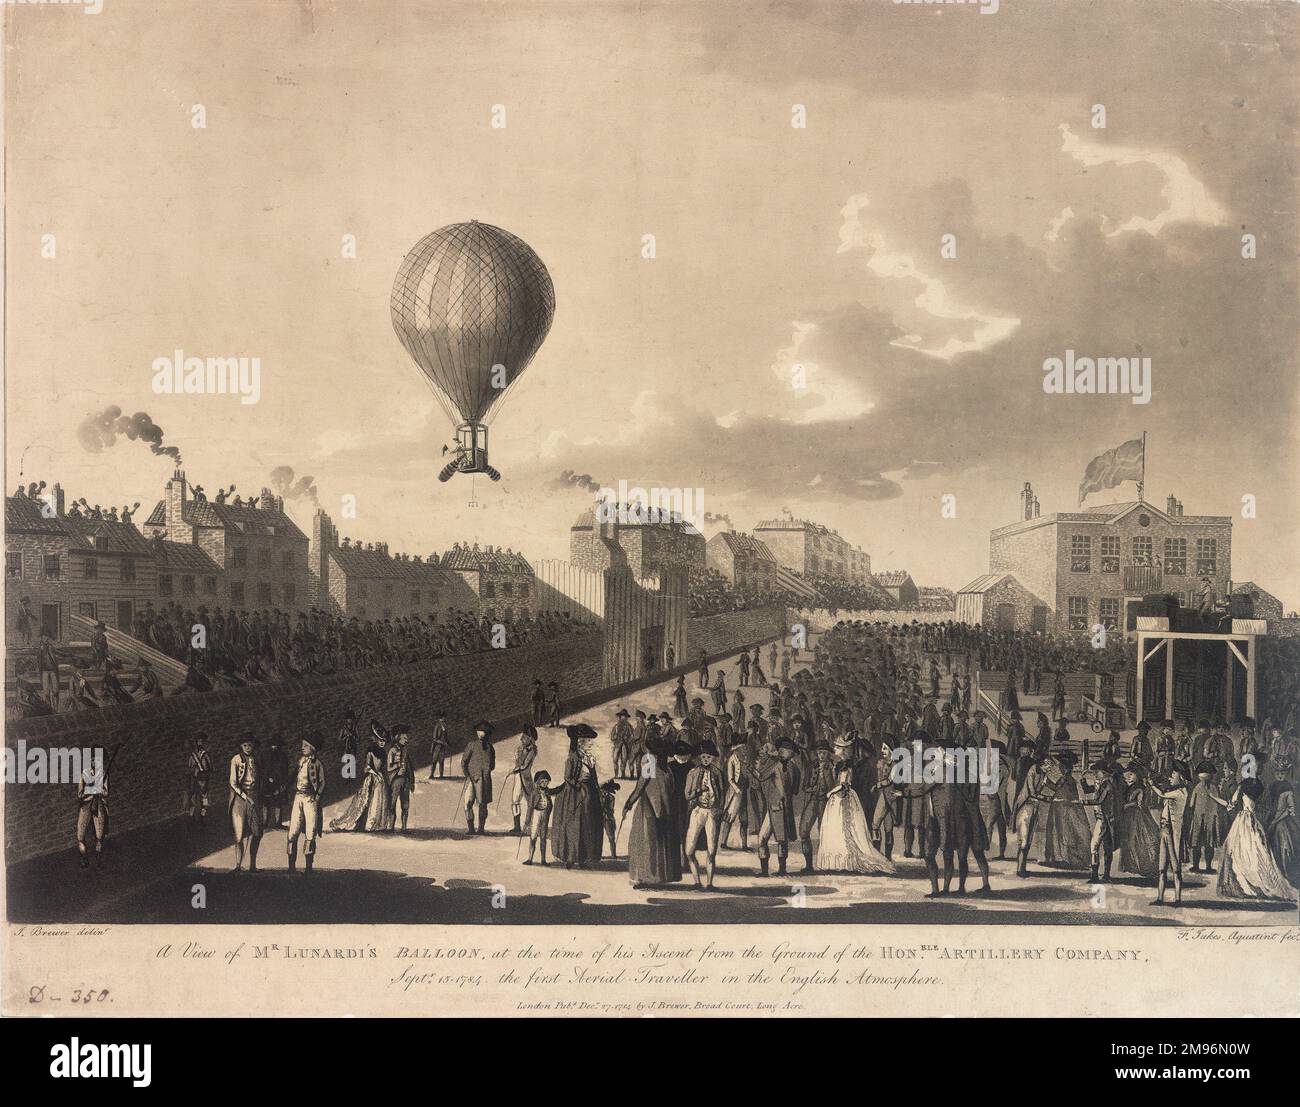 Lunardi's balloon ascent from the grounds of the Honourable Artillery Company, making him the first Aerial Traveller in the English Atmosphere.  With crowds of spectators. Stock Photo